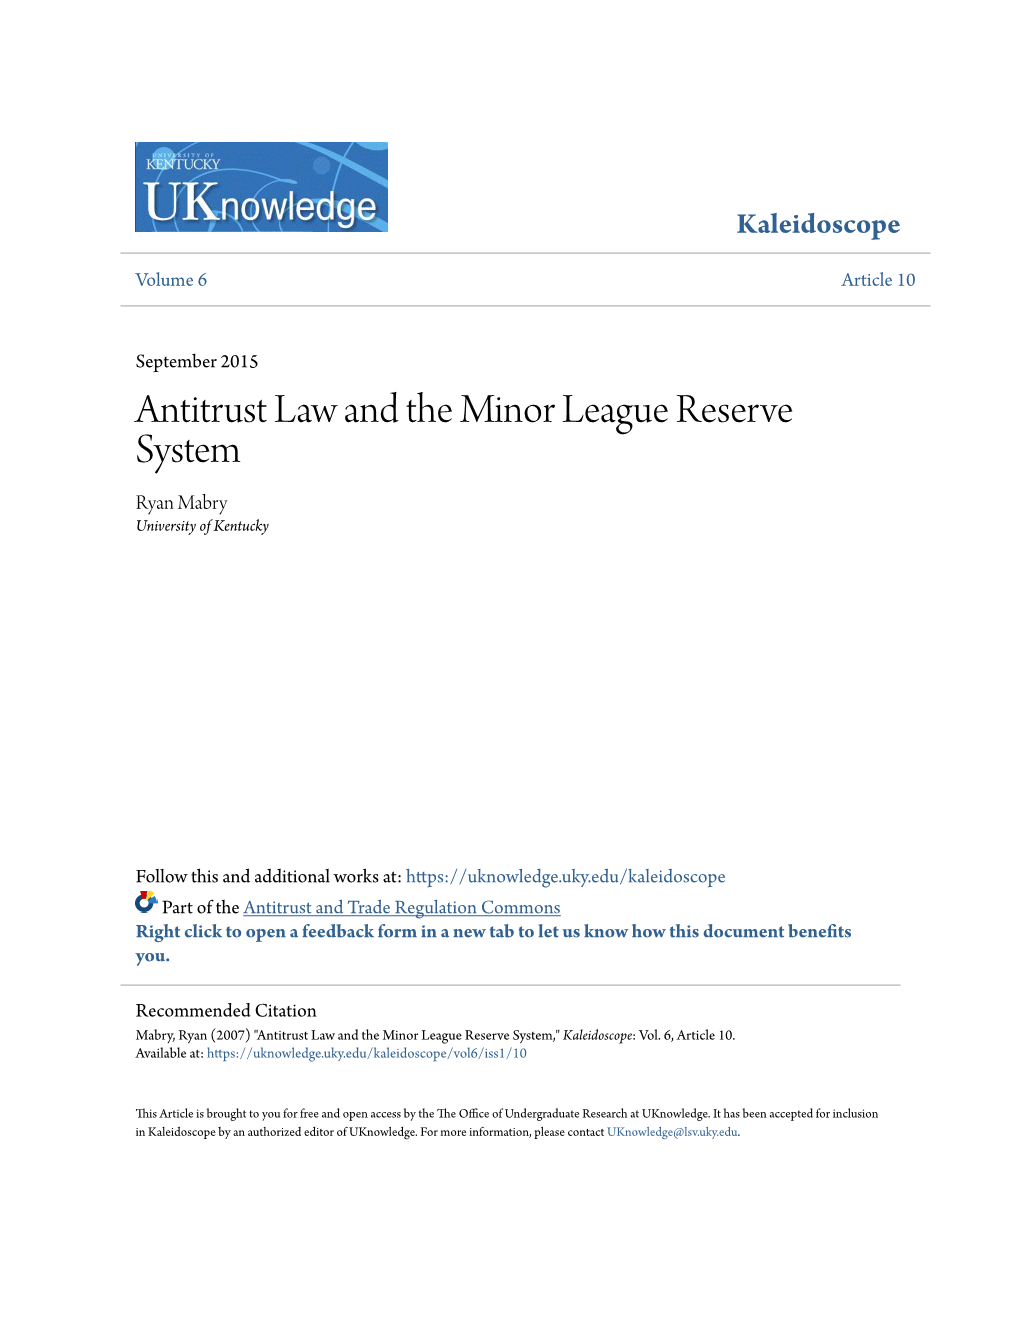 Antitrust Law and the Minor League Reserve System Ryan Mabry University of Kentucky